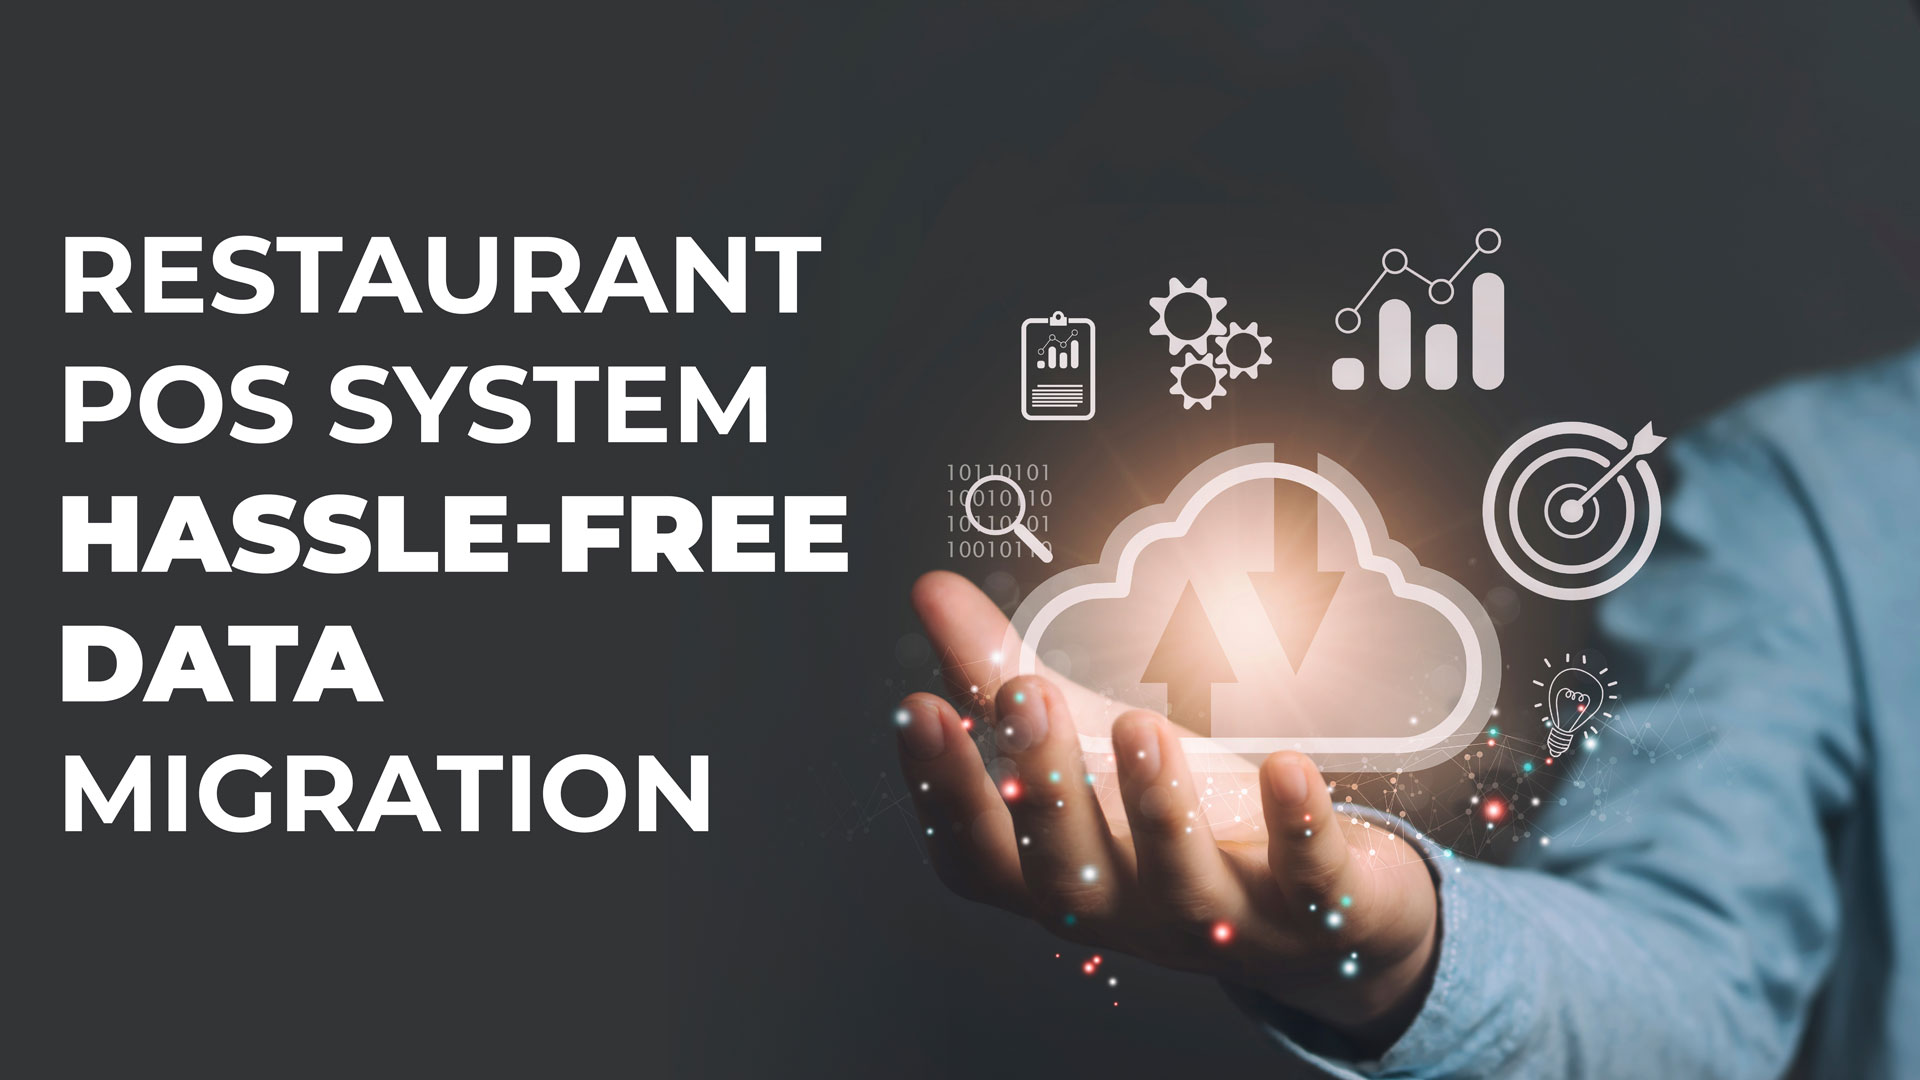 Restaurant POS System Hassle-free Data Migration